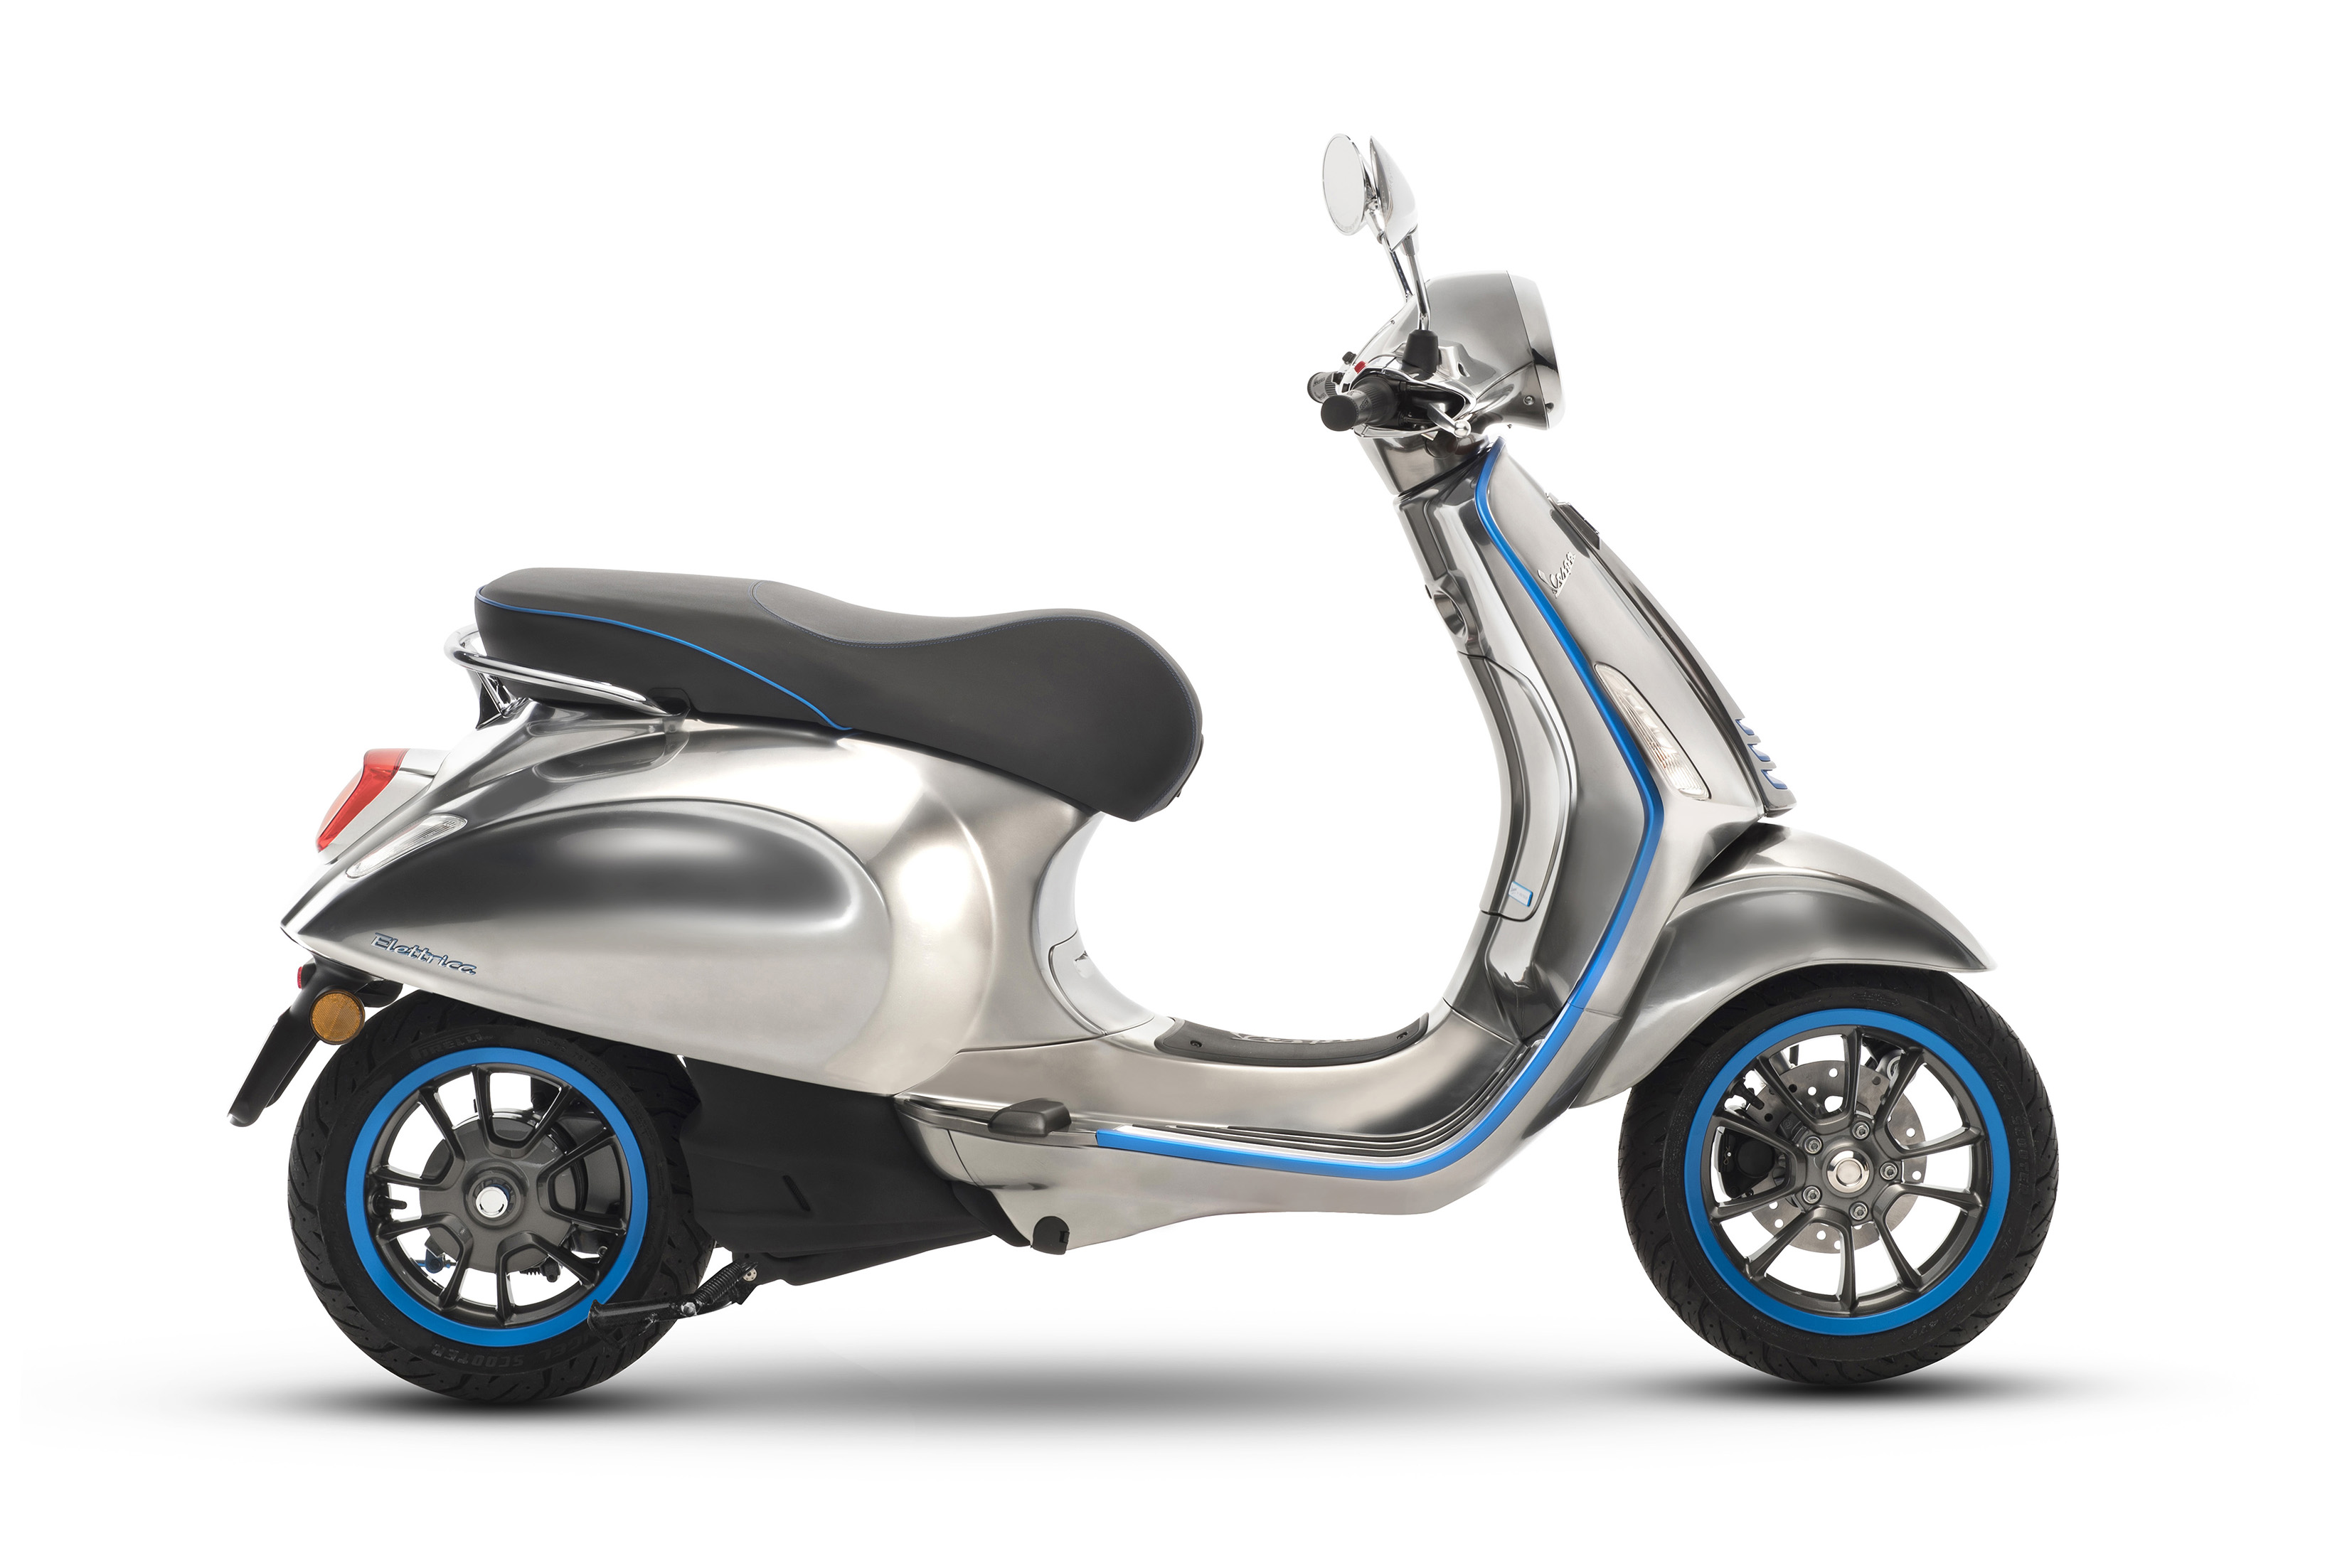 Vespa Electric Scooter Arrives Next Year With 62 Miles Of Range | Gas 2